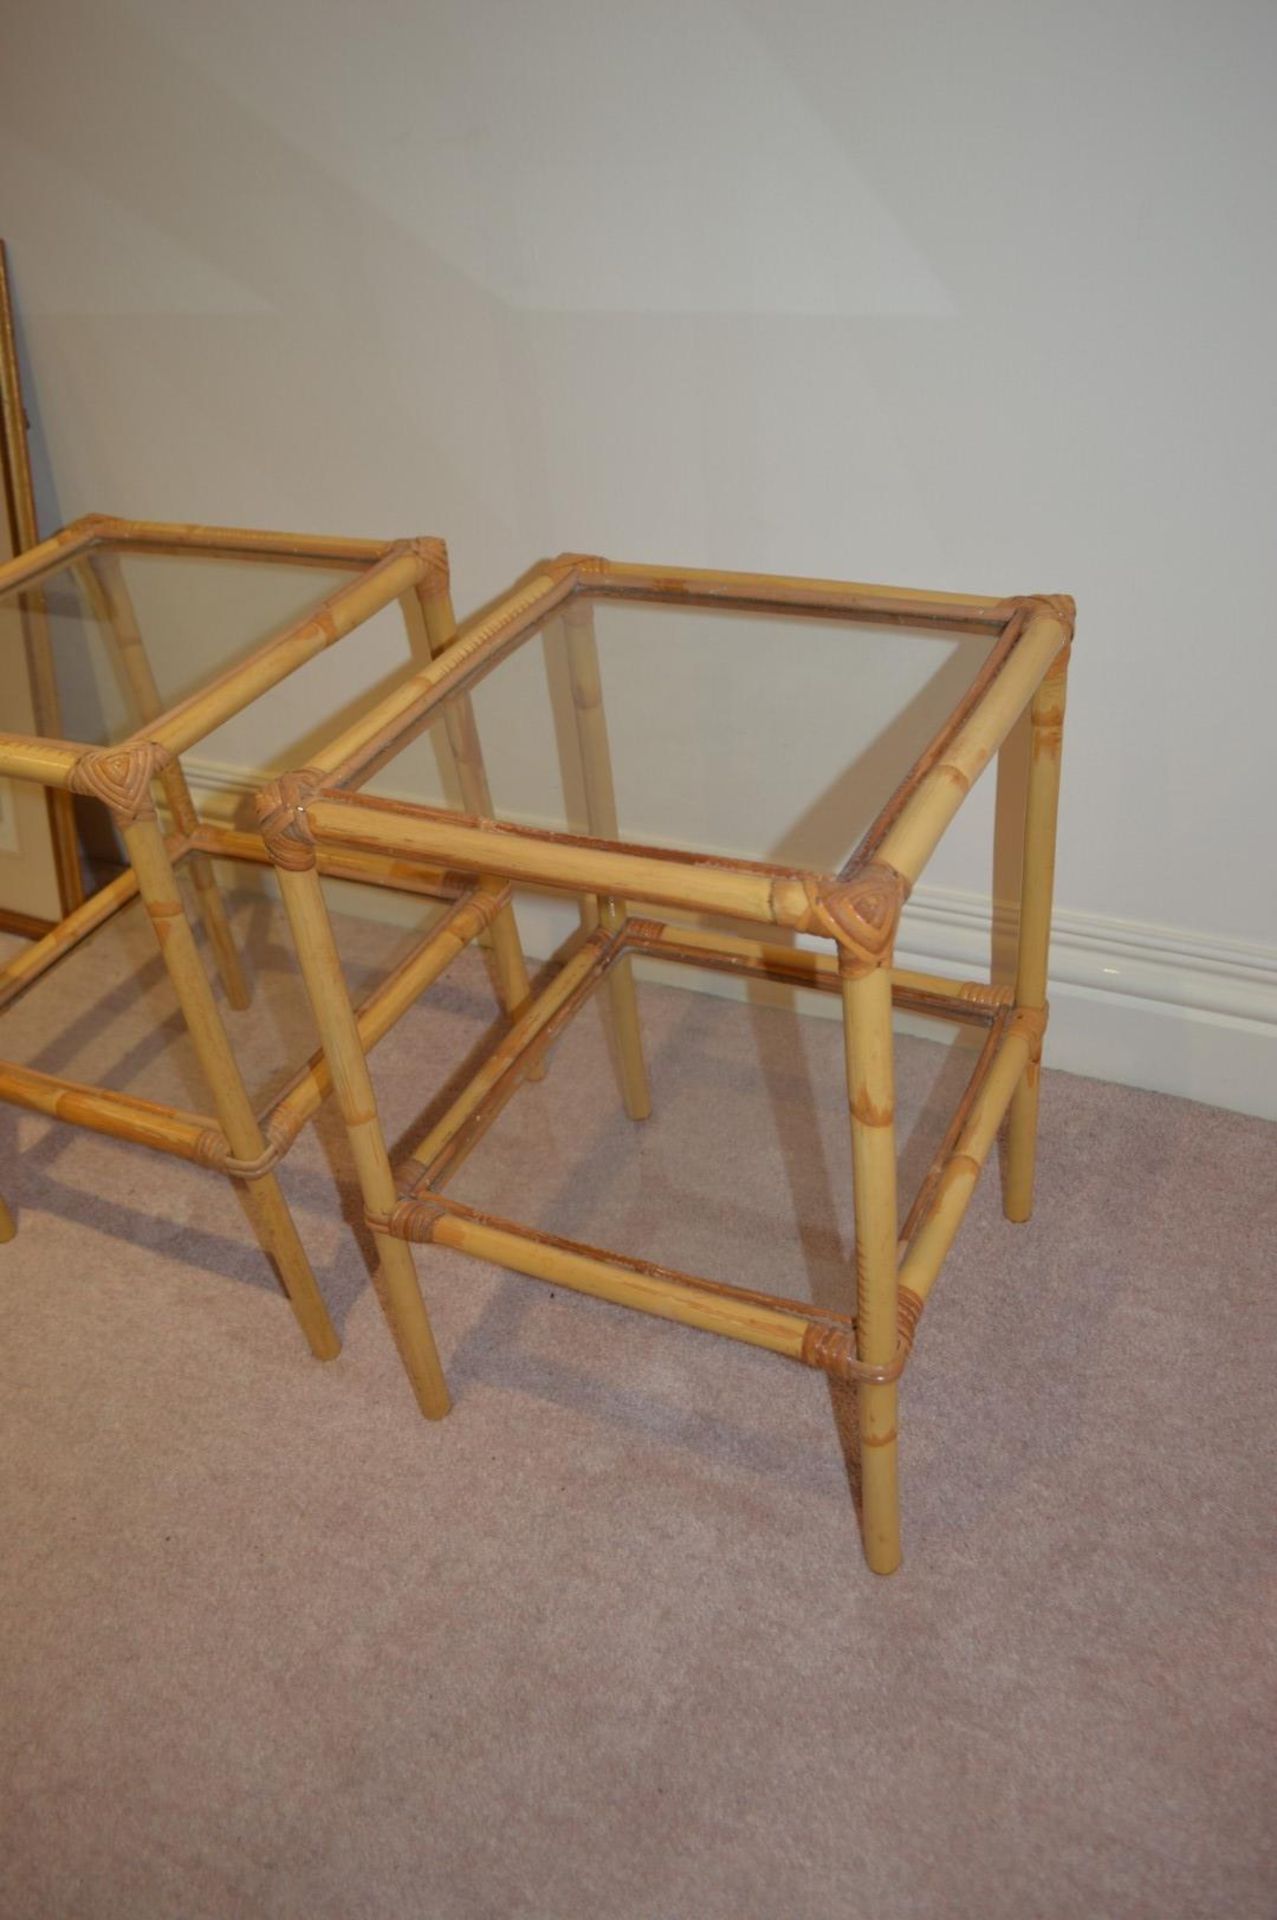 2 x Bamboo Glass Side Table - CL368 - Bowdon WA14 - NO VAT - Image 5 of 5